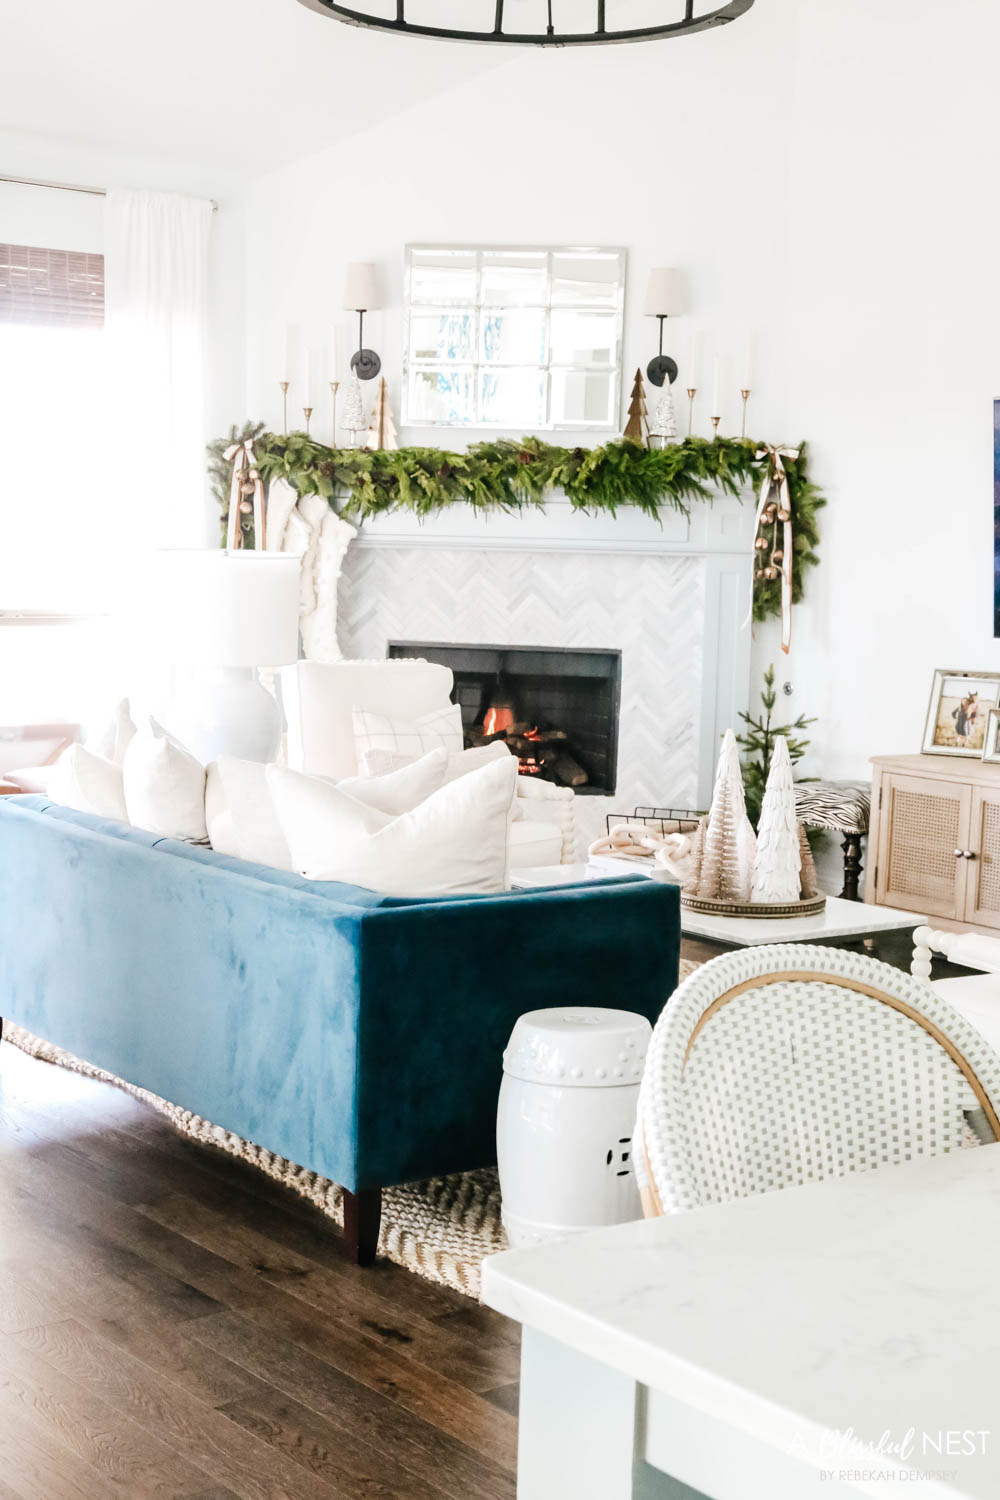 Navy blue velvet sofa facing a fireplace mantle. Green holiday garland with a mirror above